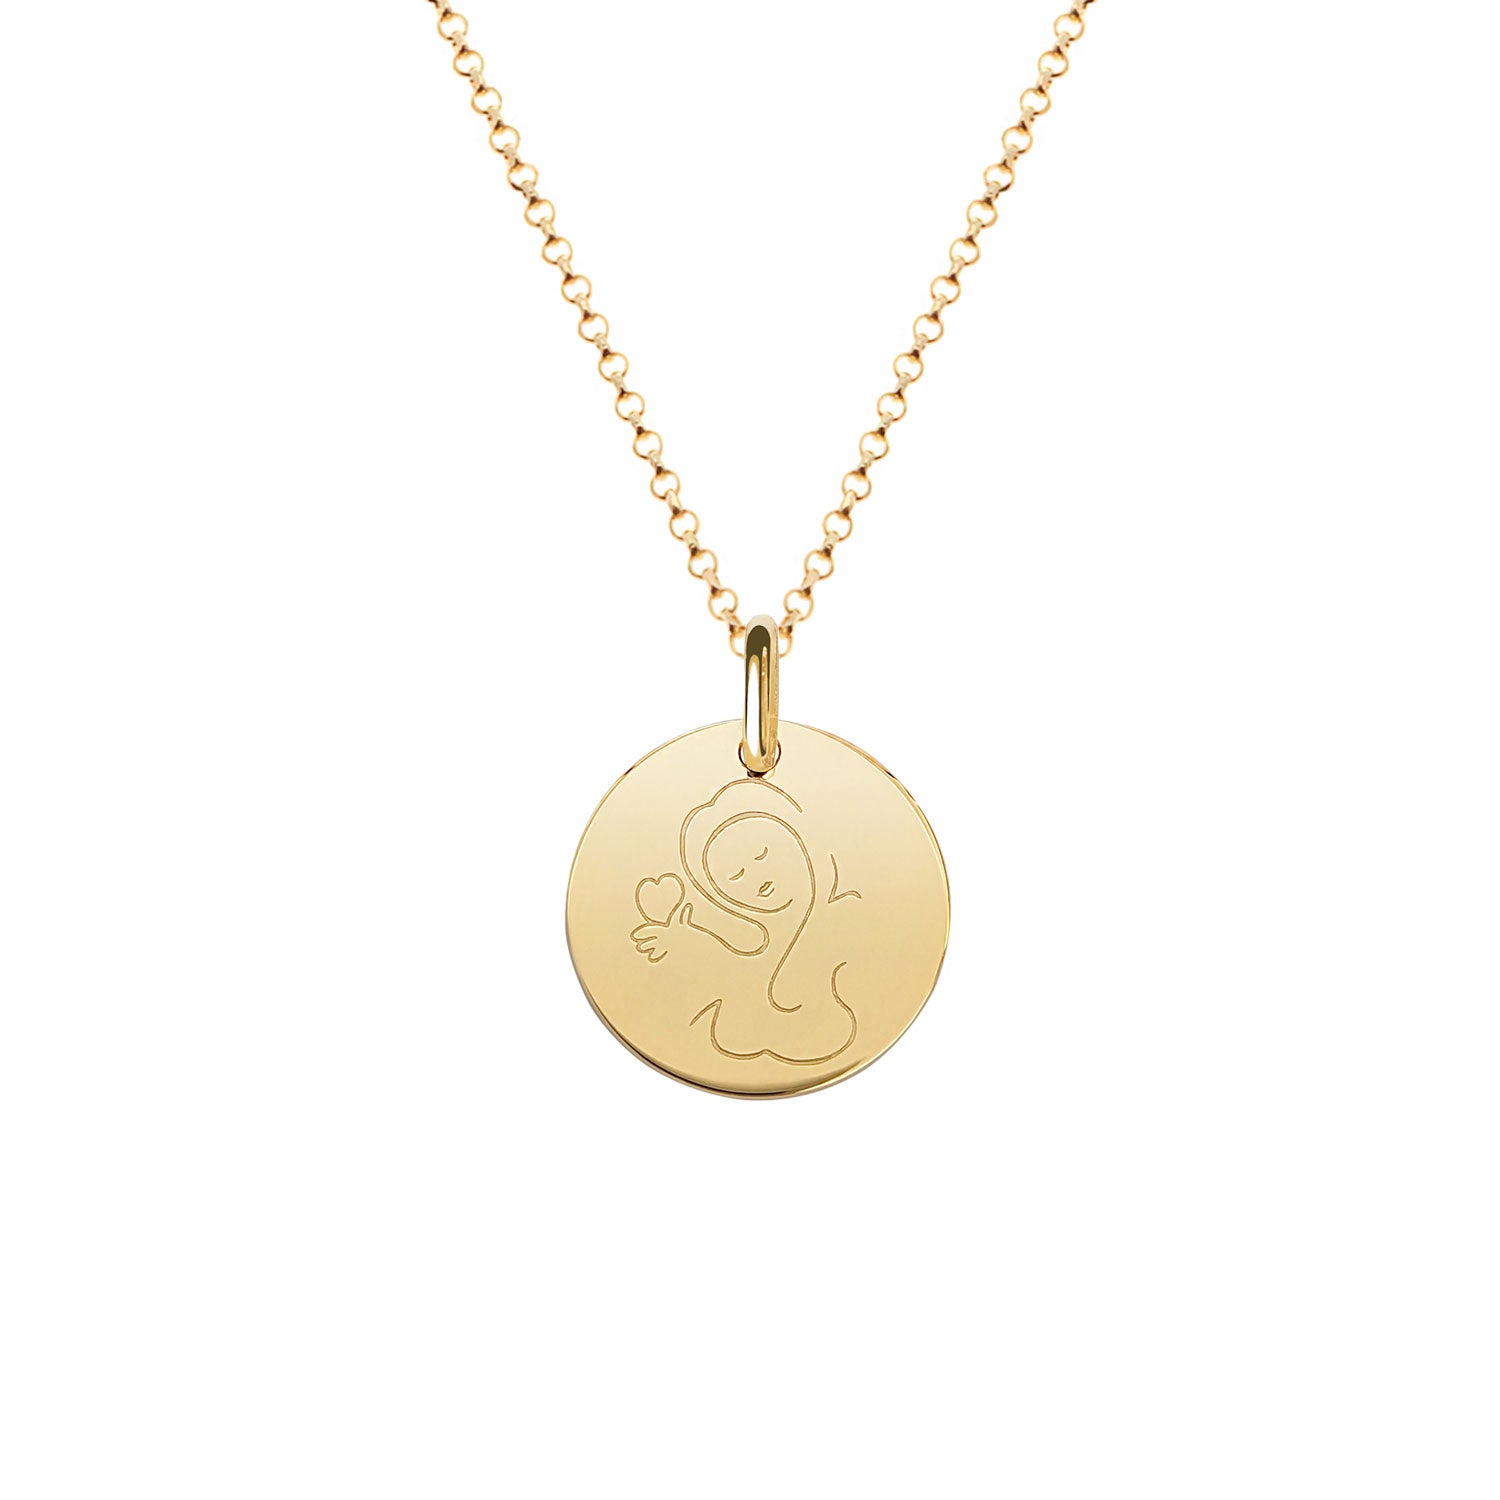 Muze 18k gold vermeil medal Love necklace, art inspired jewelry, dainty talisman symbol of love, protection. Meaningful sentimental gift perfect for mother, daughter or girlfriend.